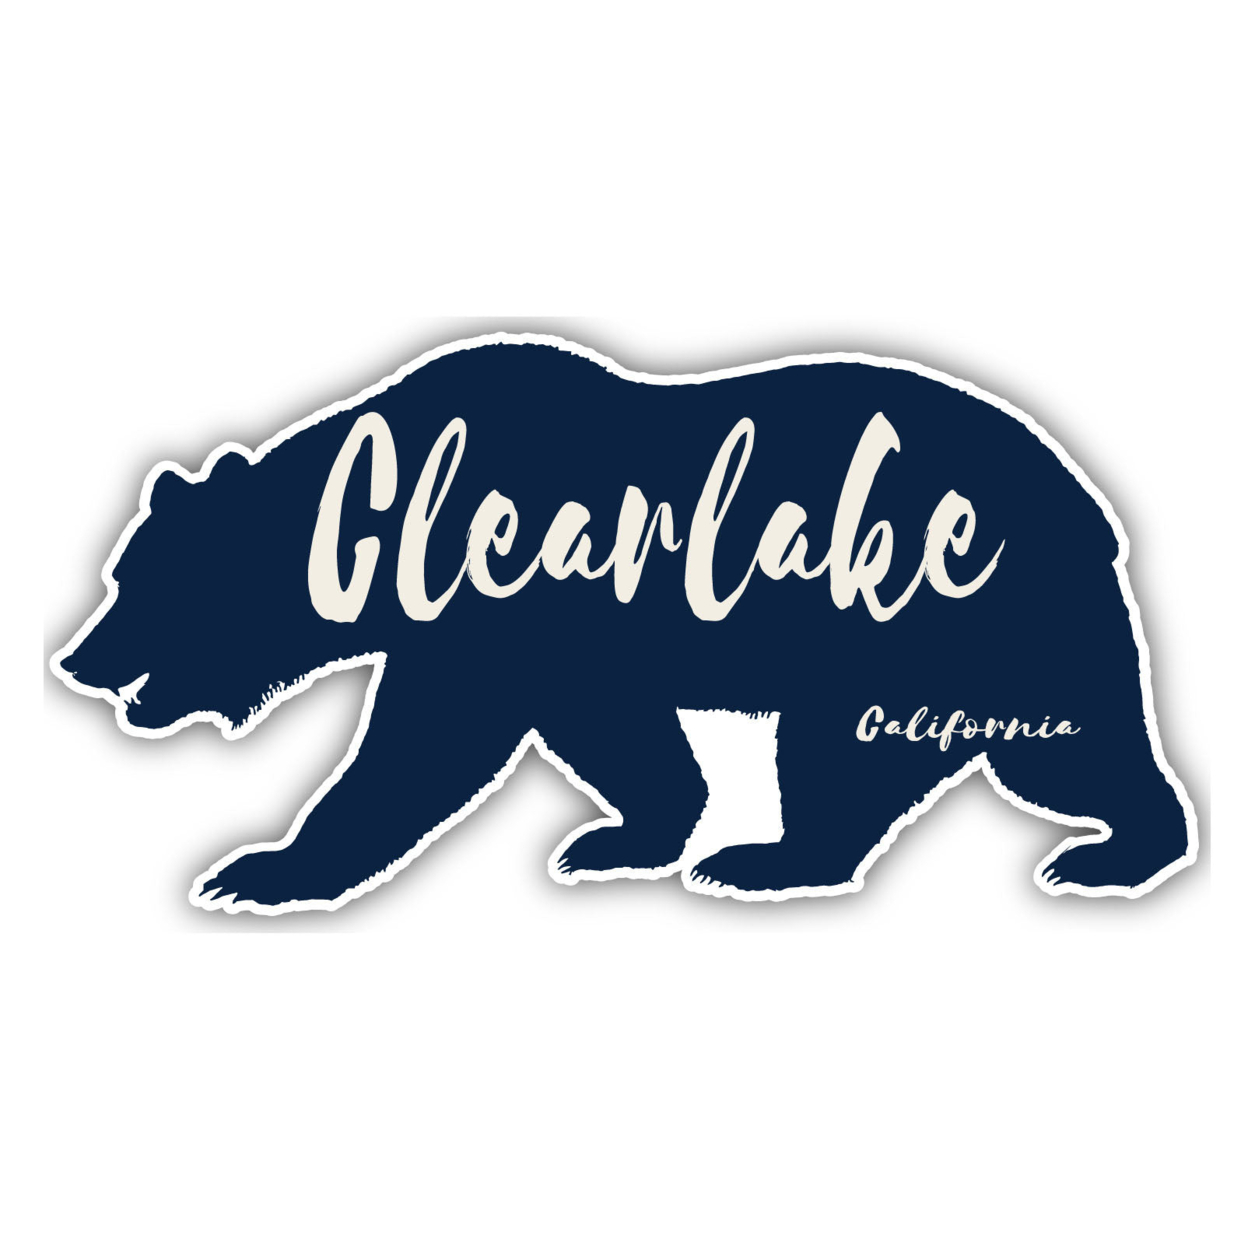 Clearlake California Souvenir Decorative Stickers (Choose Theme And Size) - 4-Pack, 2-Inch, Camp Life